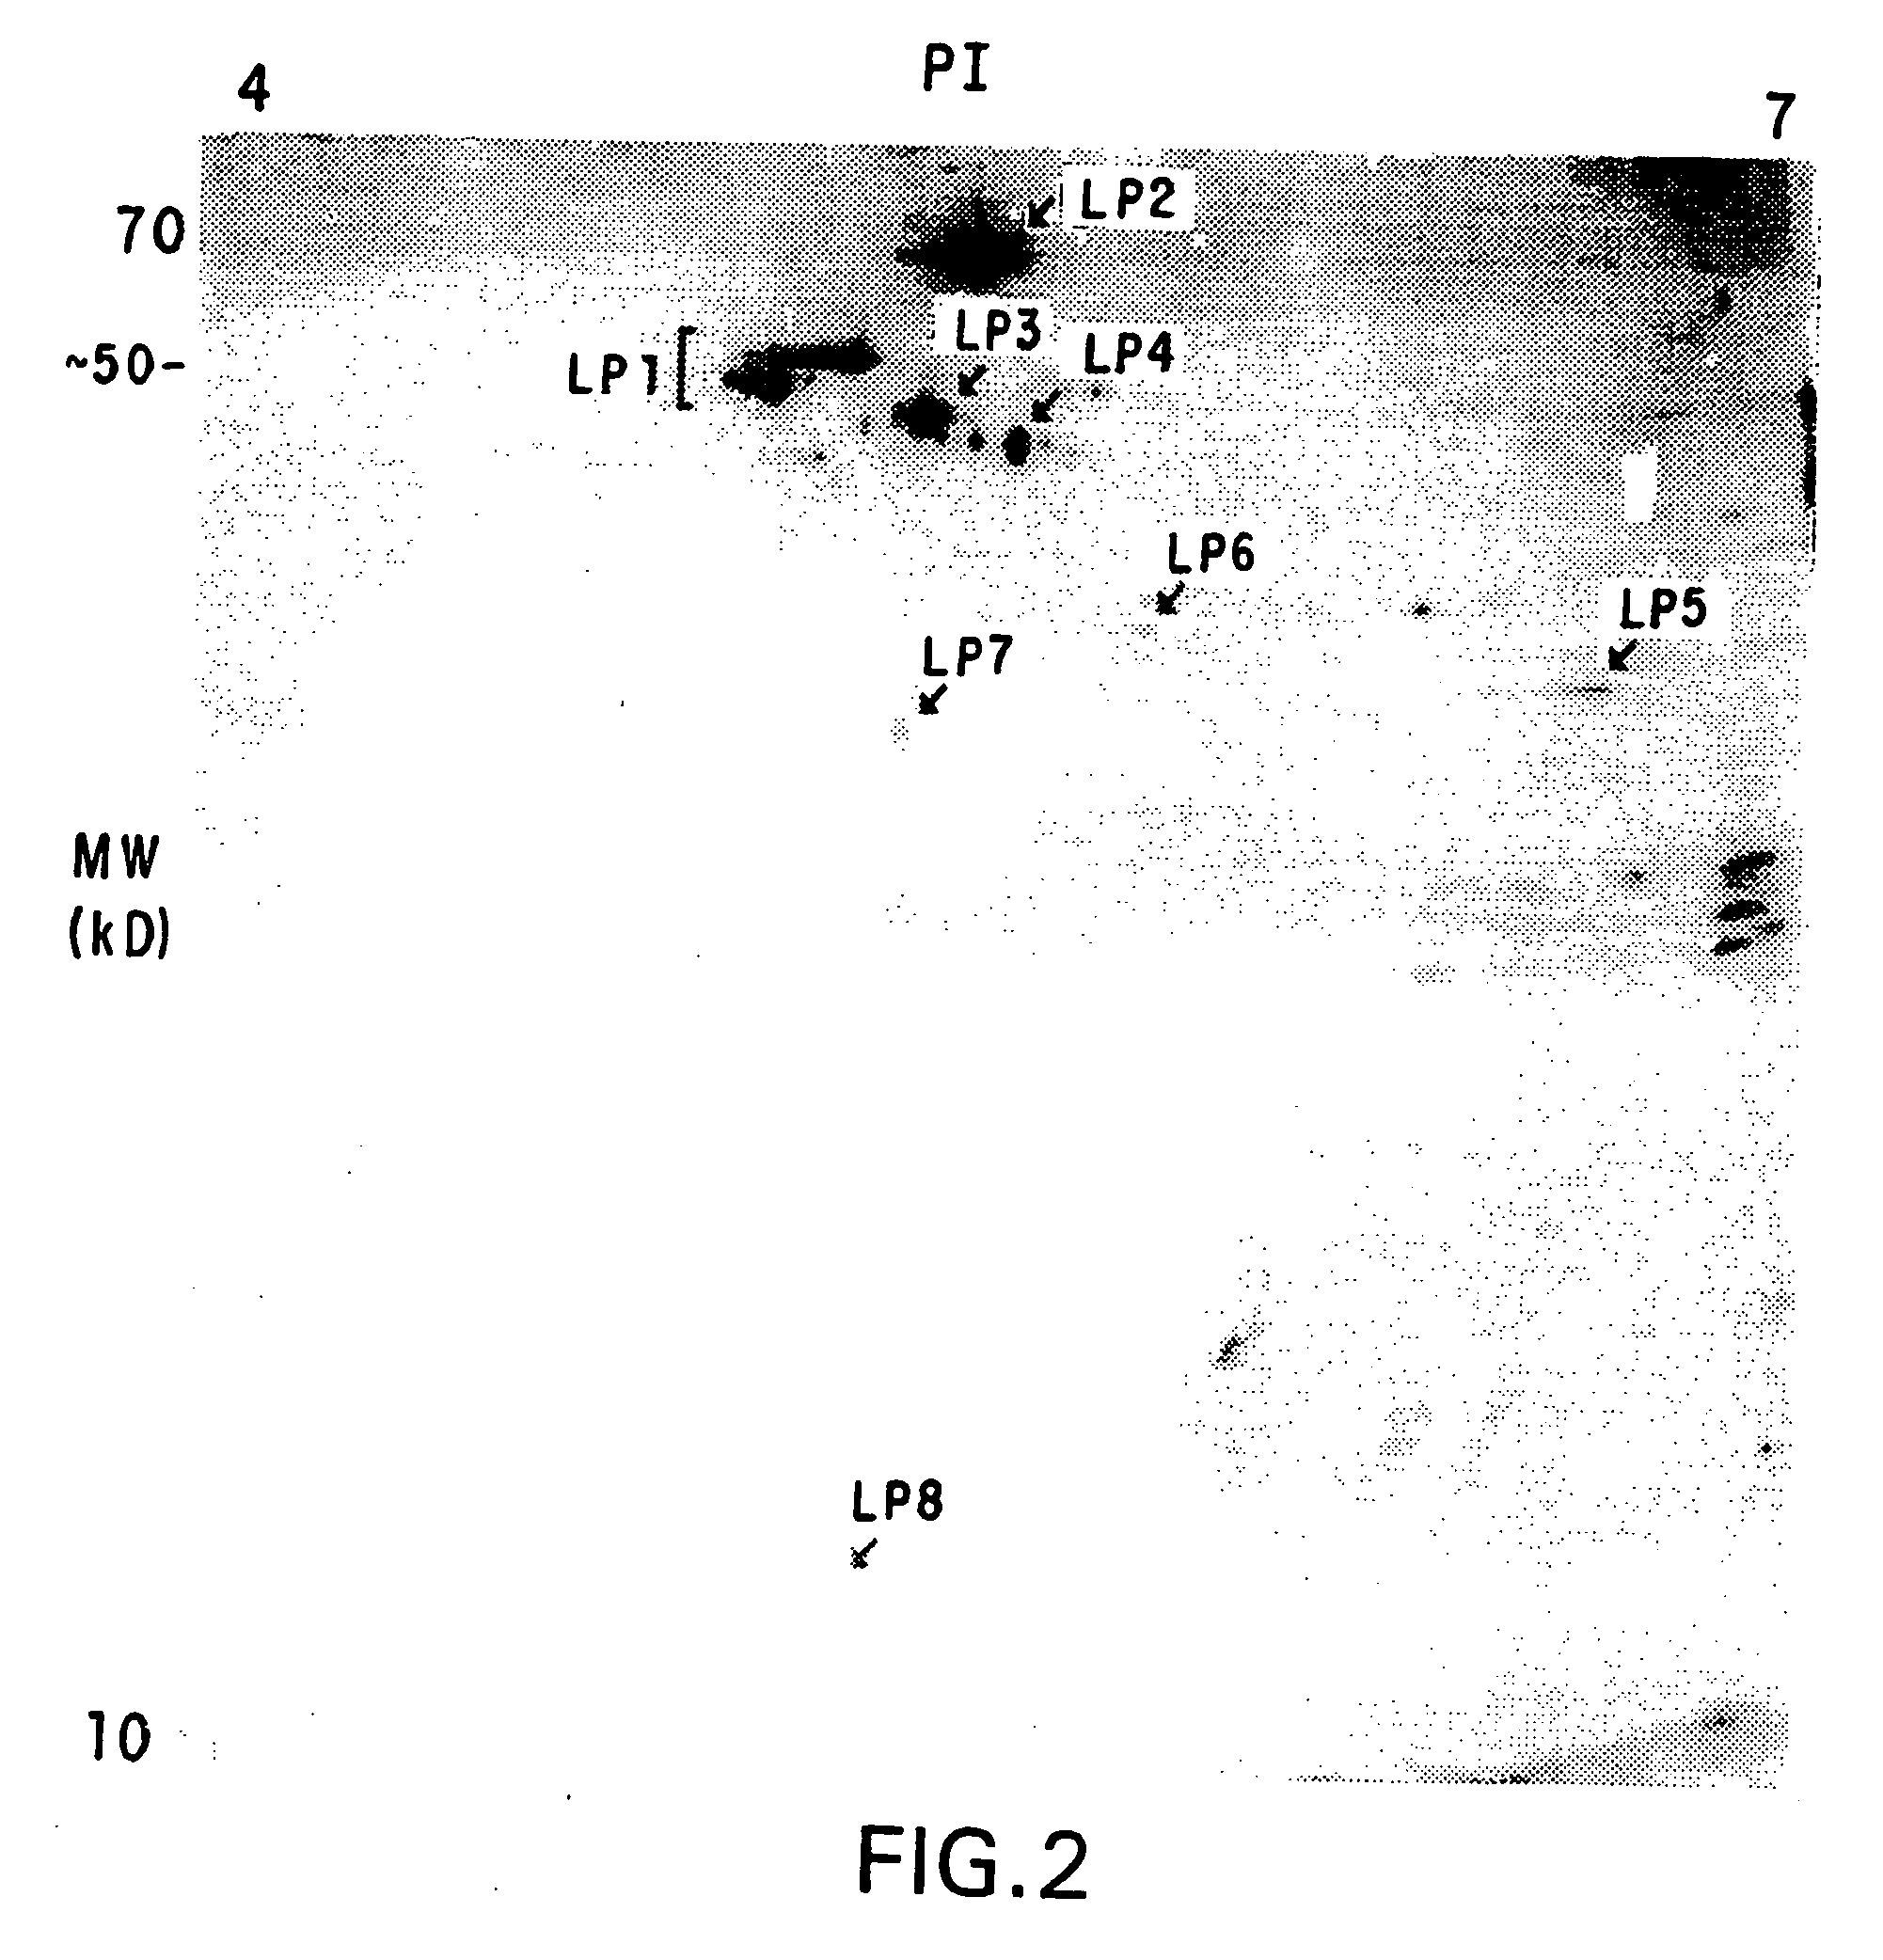 Method for identification of cellular protein antigens and presence of antibodies to specific cellular protein antigens in serum